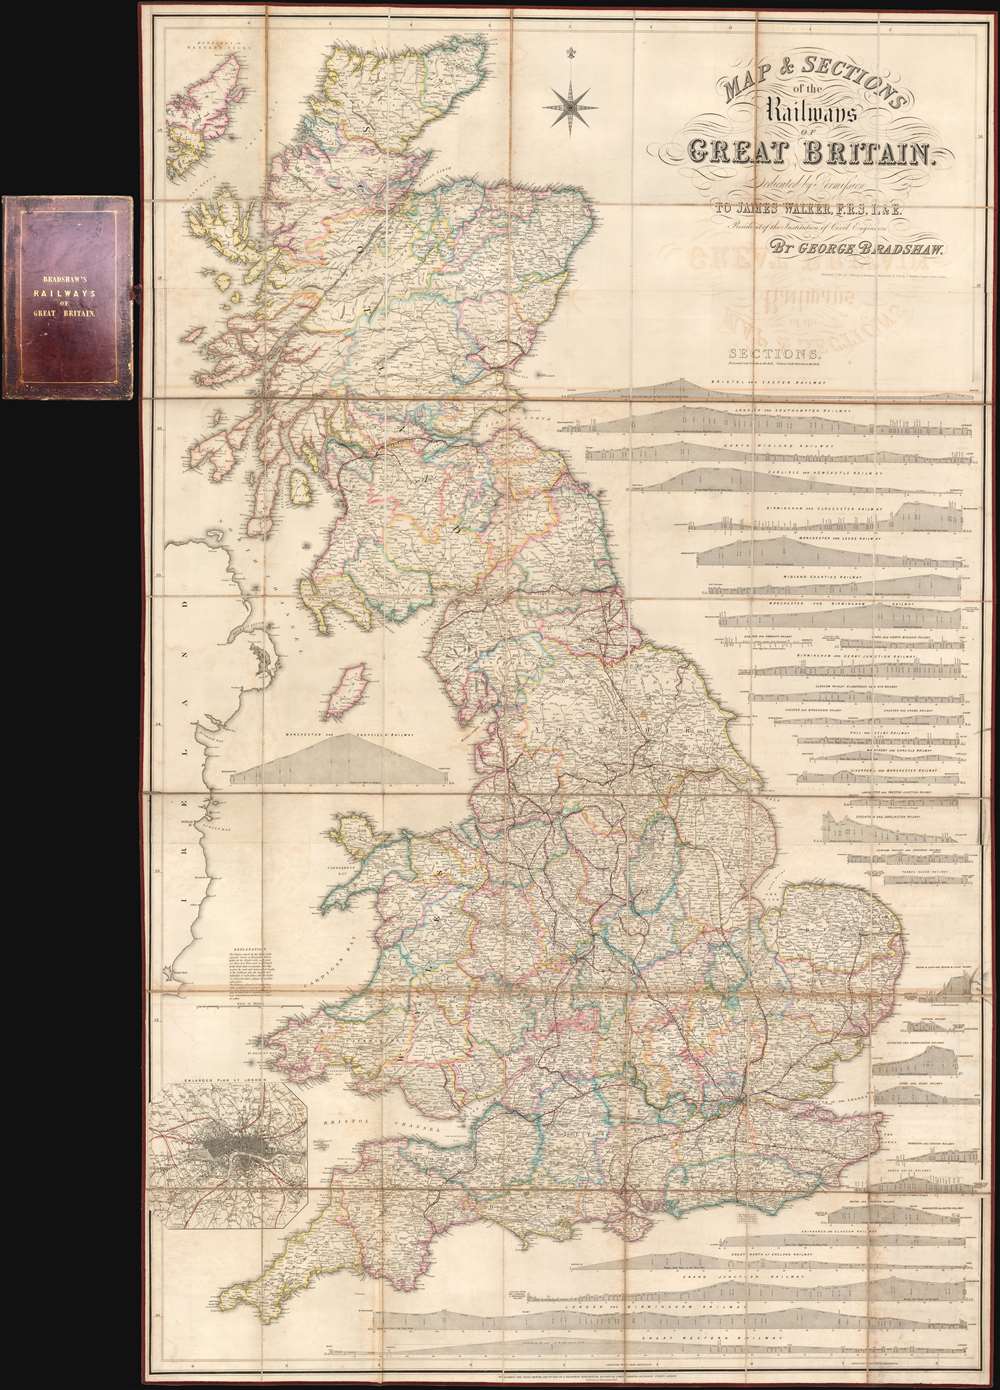 Map and Sections of the Railways of Great Britain. - Main View